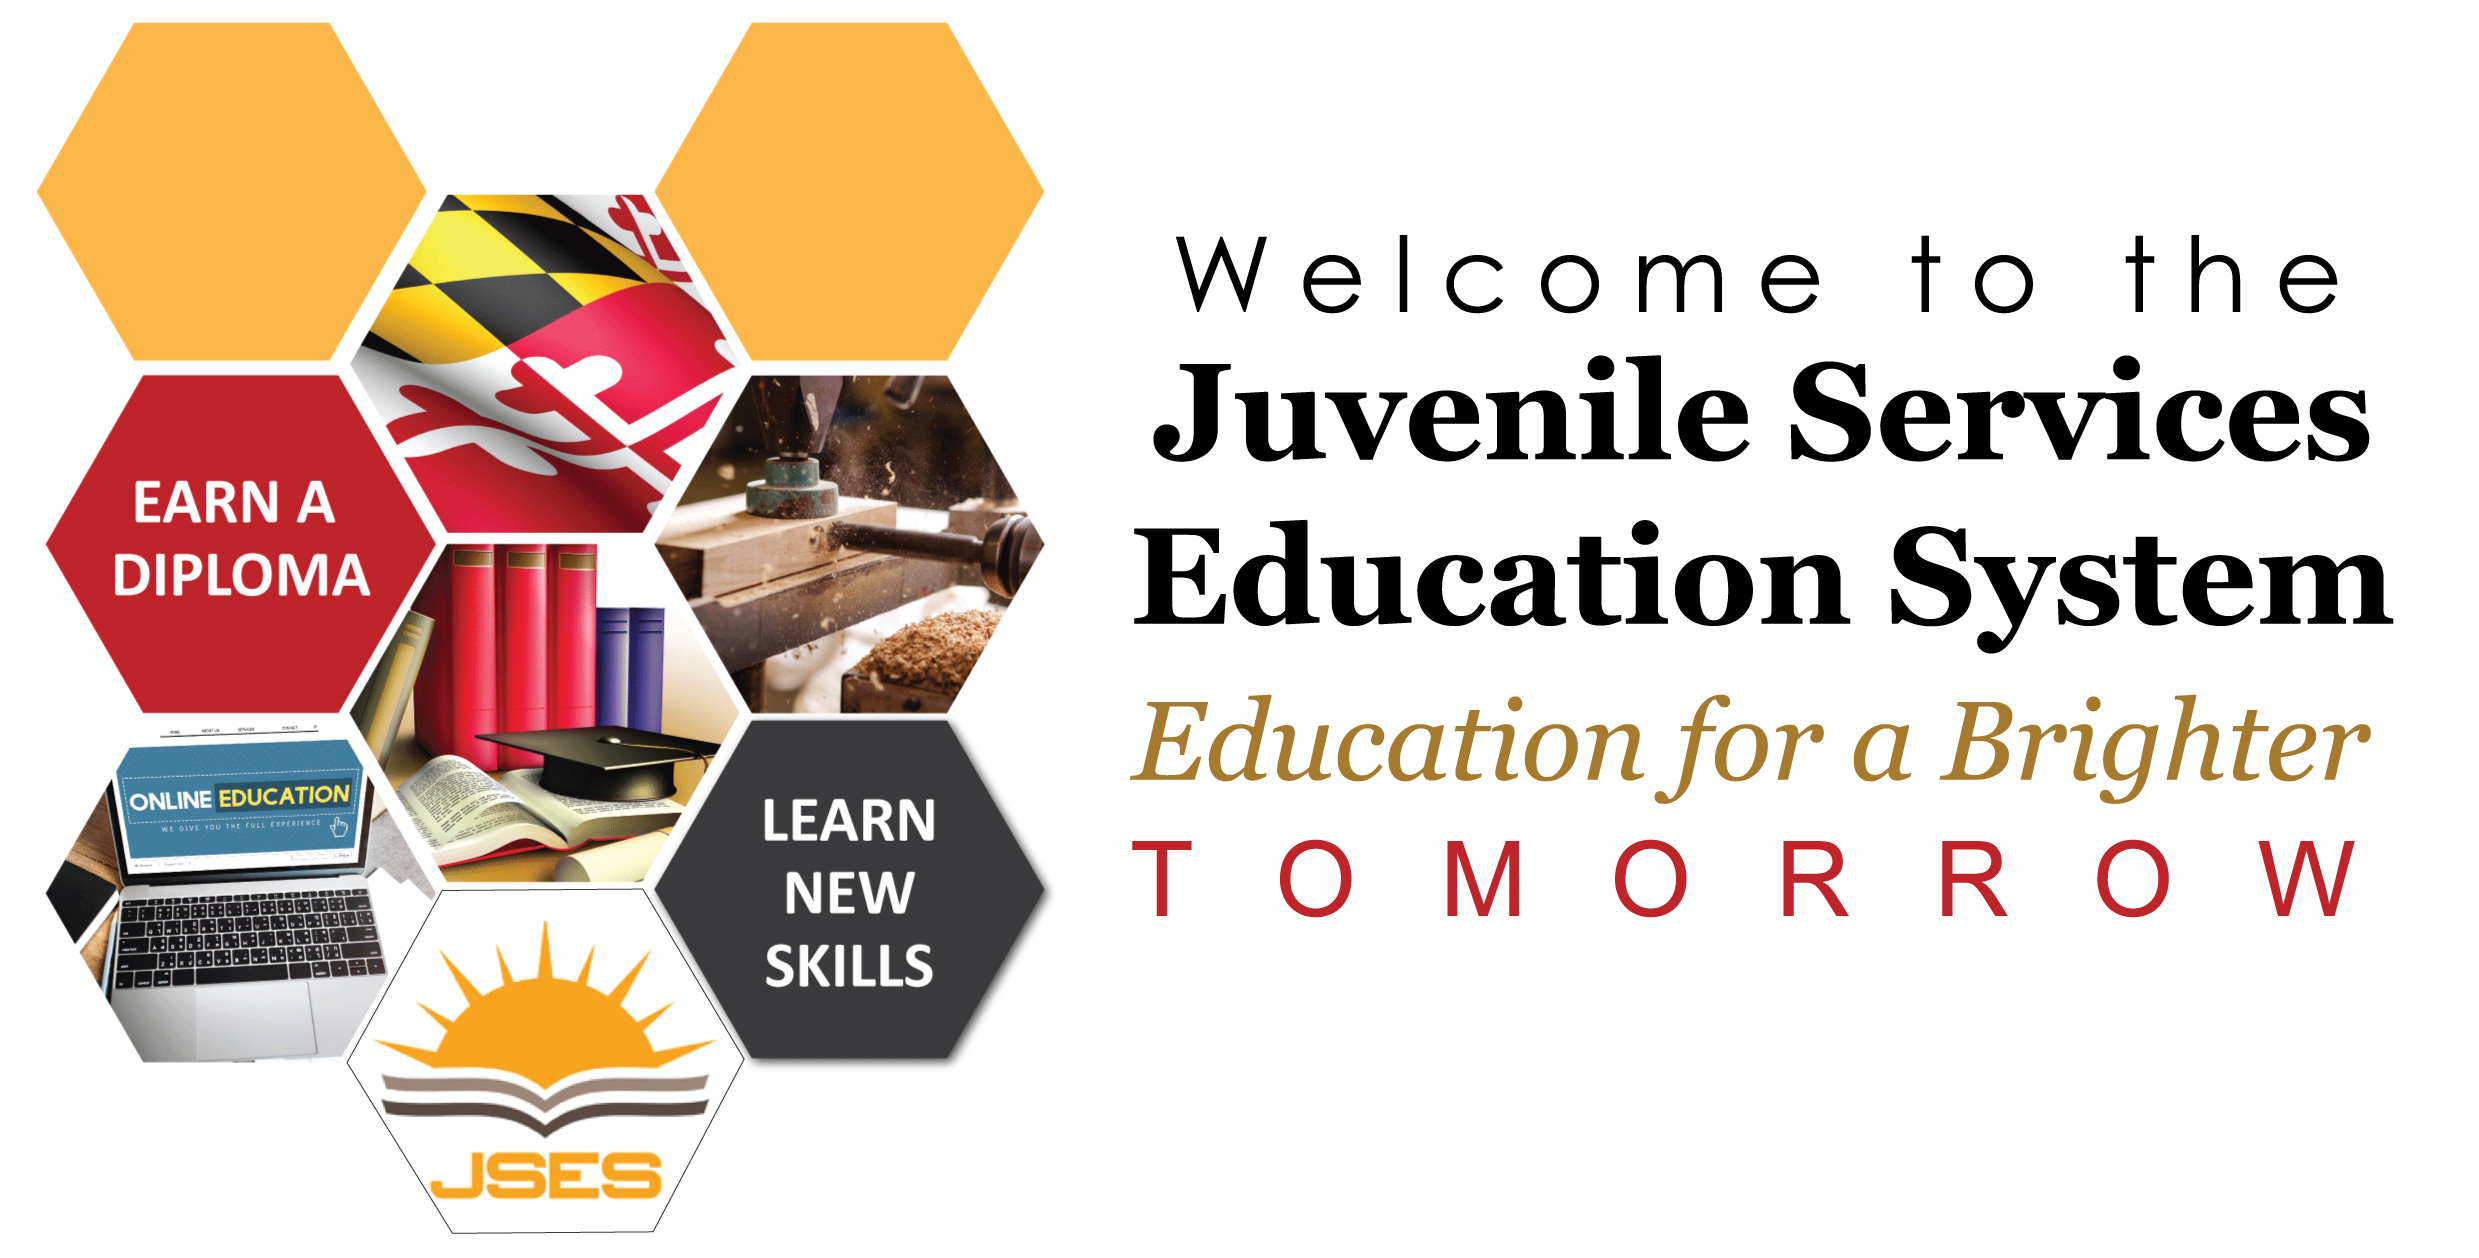 Welcome to the Juvenile Services Education System Education for a Brighter Tomorrow